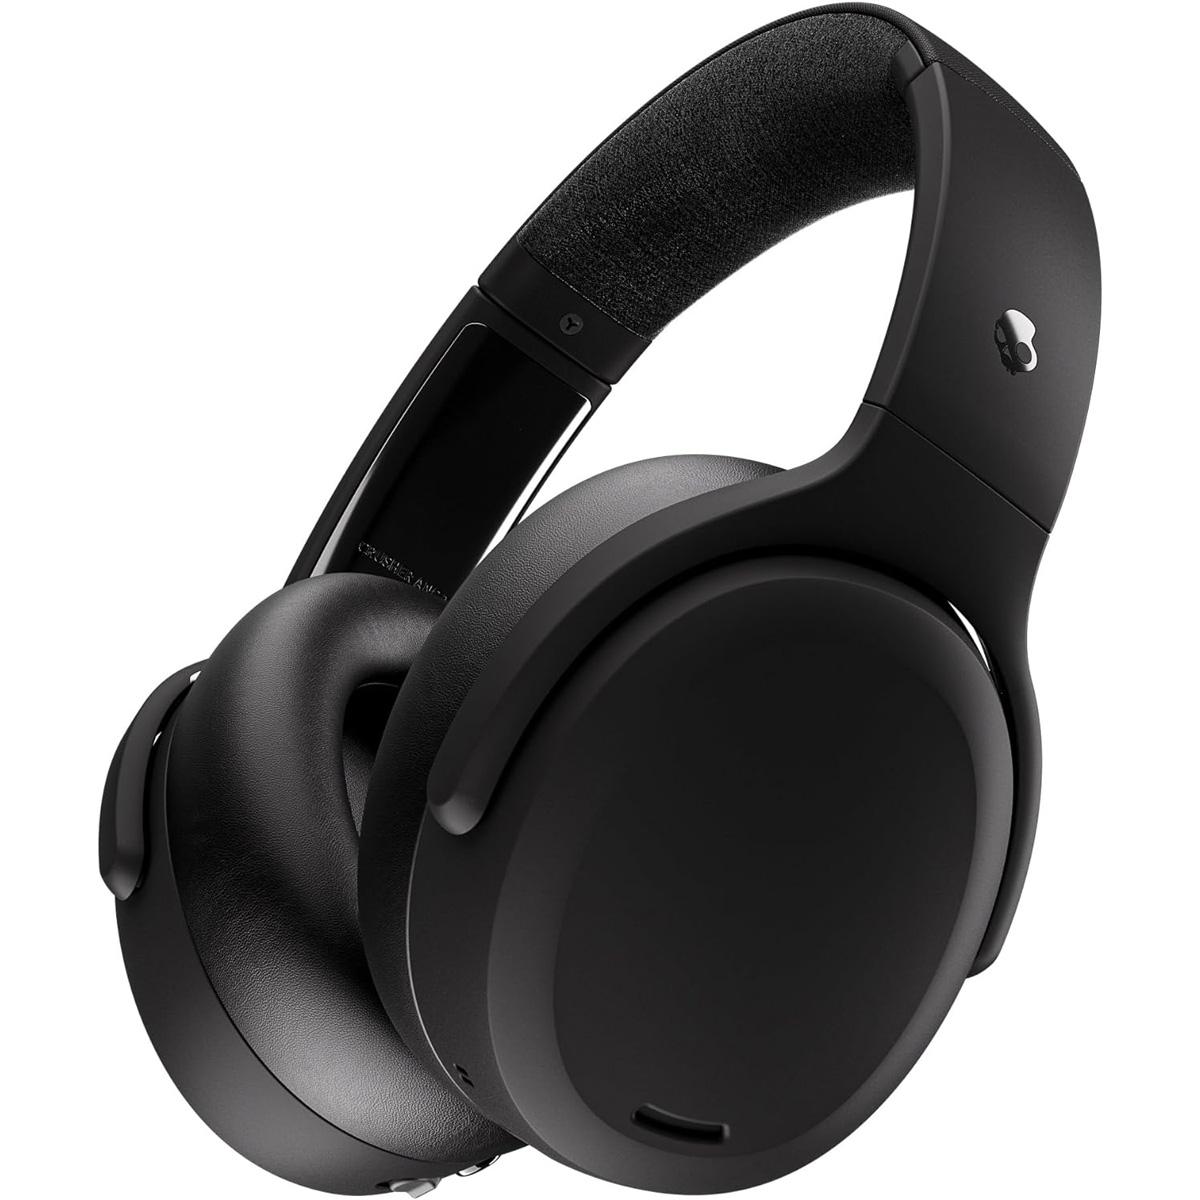 Skullcandy Crusher ANC 2 Noise Cancelling Wireless Headphones for $169.99 Shipped